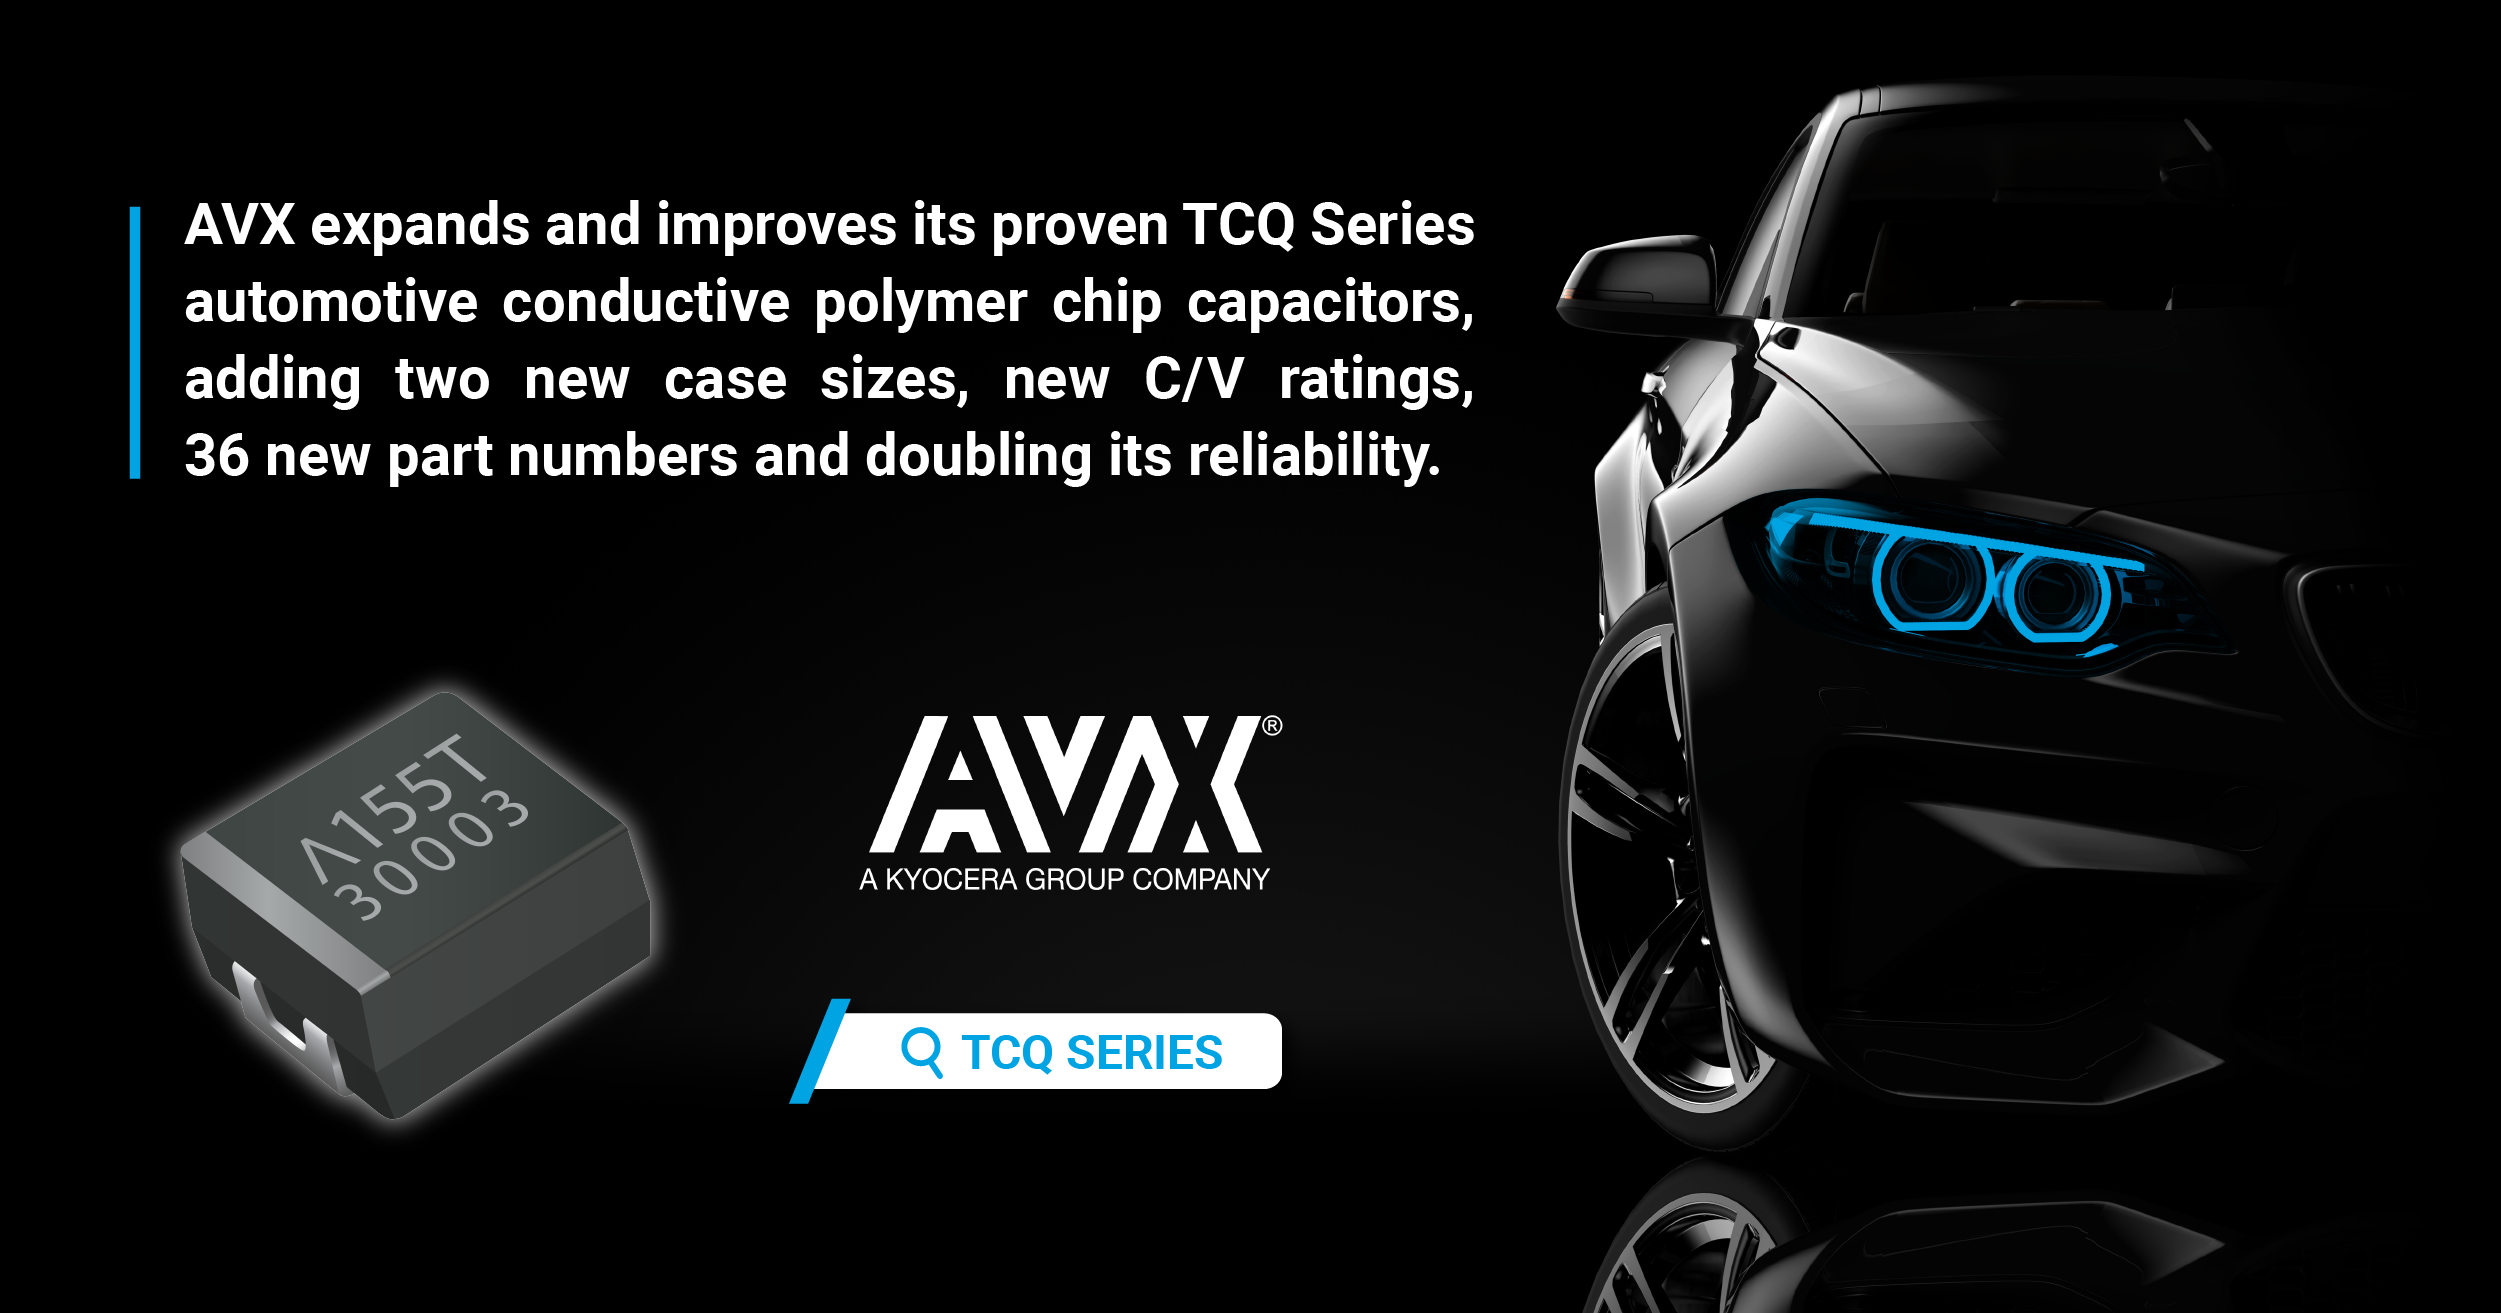 AVX Expands and Improves its Proven TCQ Series Automotive Conductive Polymer Chip Capacitors, Adding Two New Case Sizes, New C/V Ratings, and 36 New Part Numbers and Doubling its Reliability